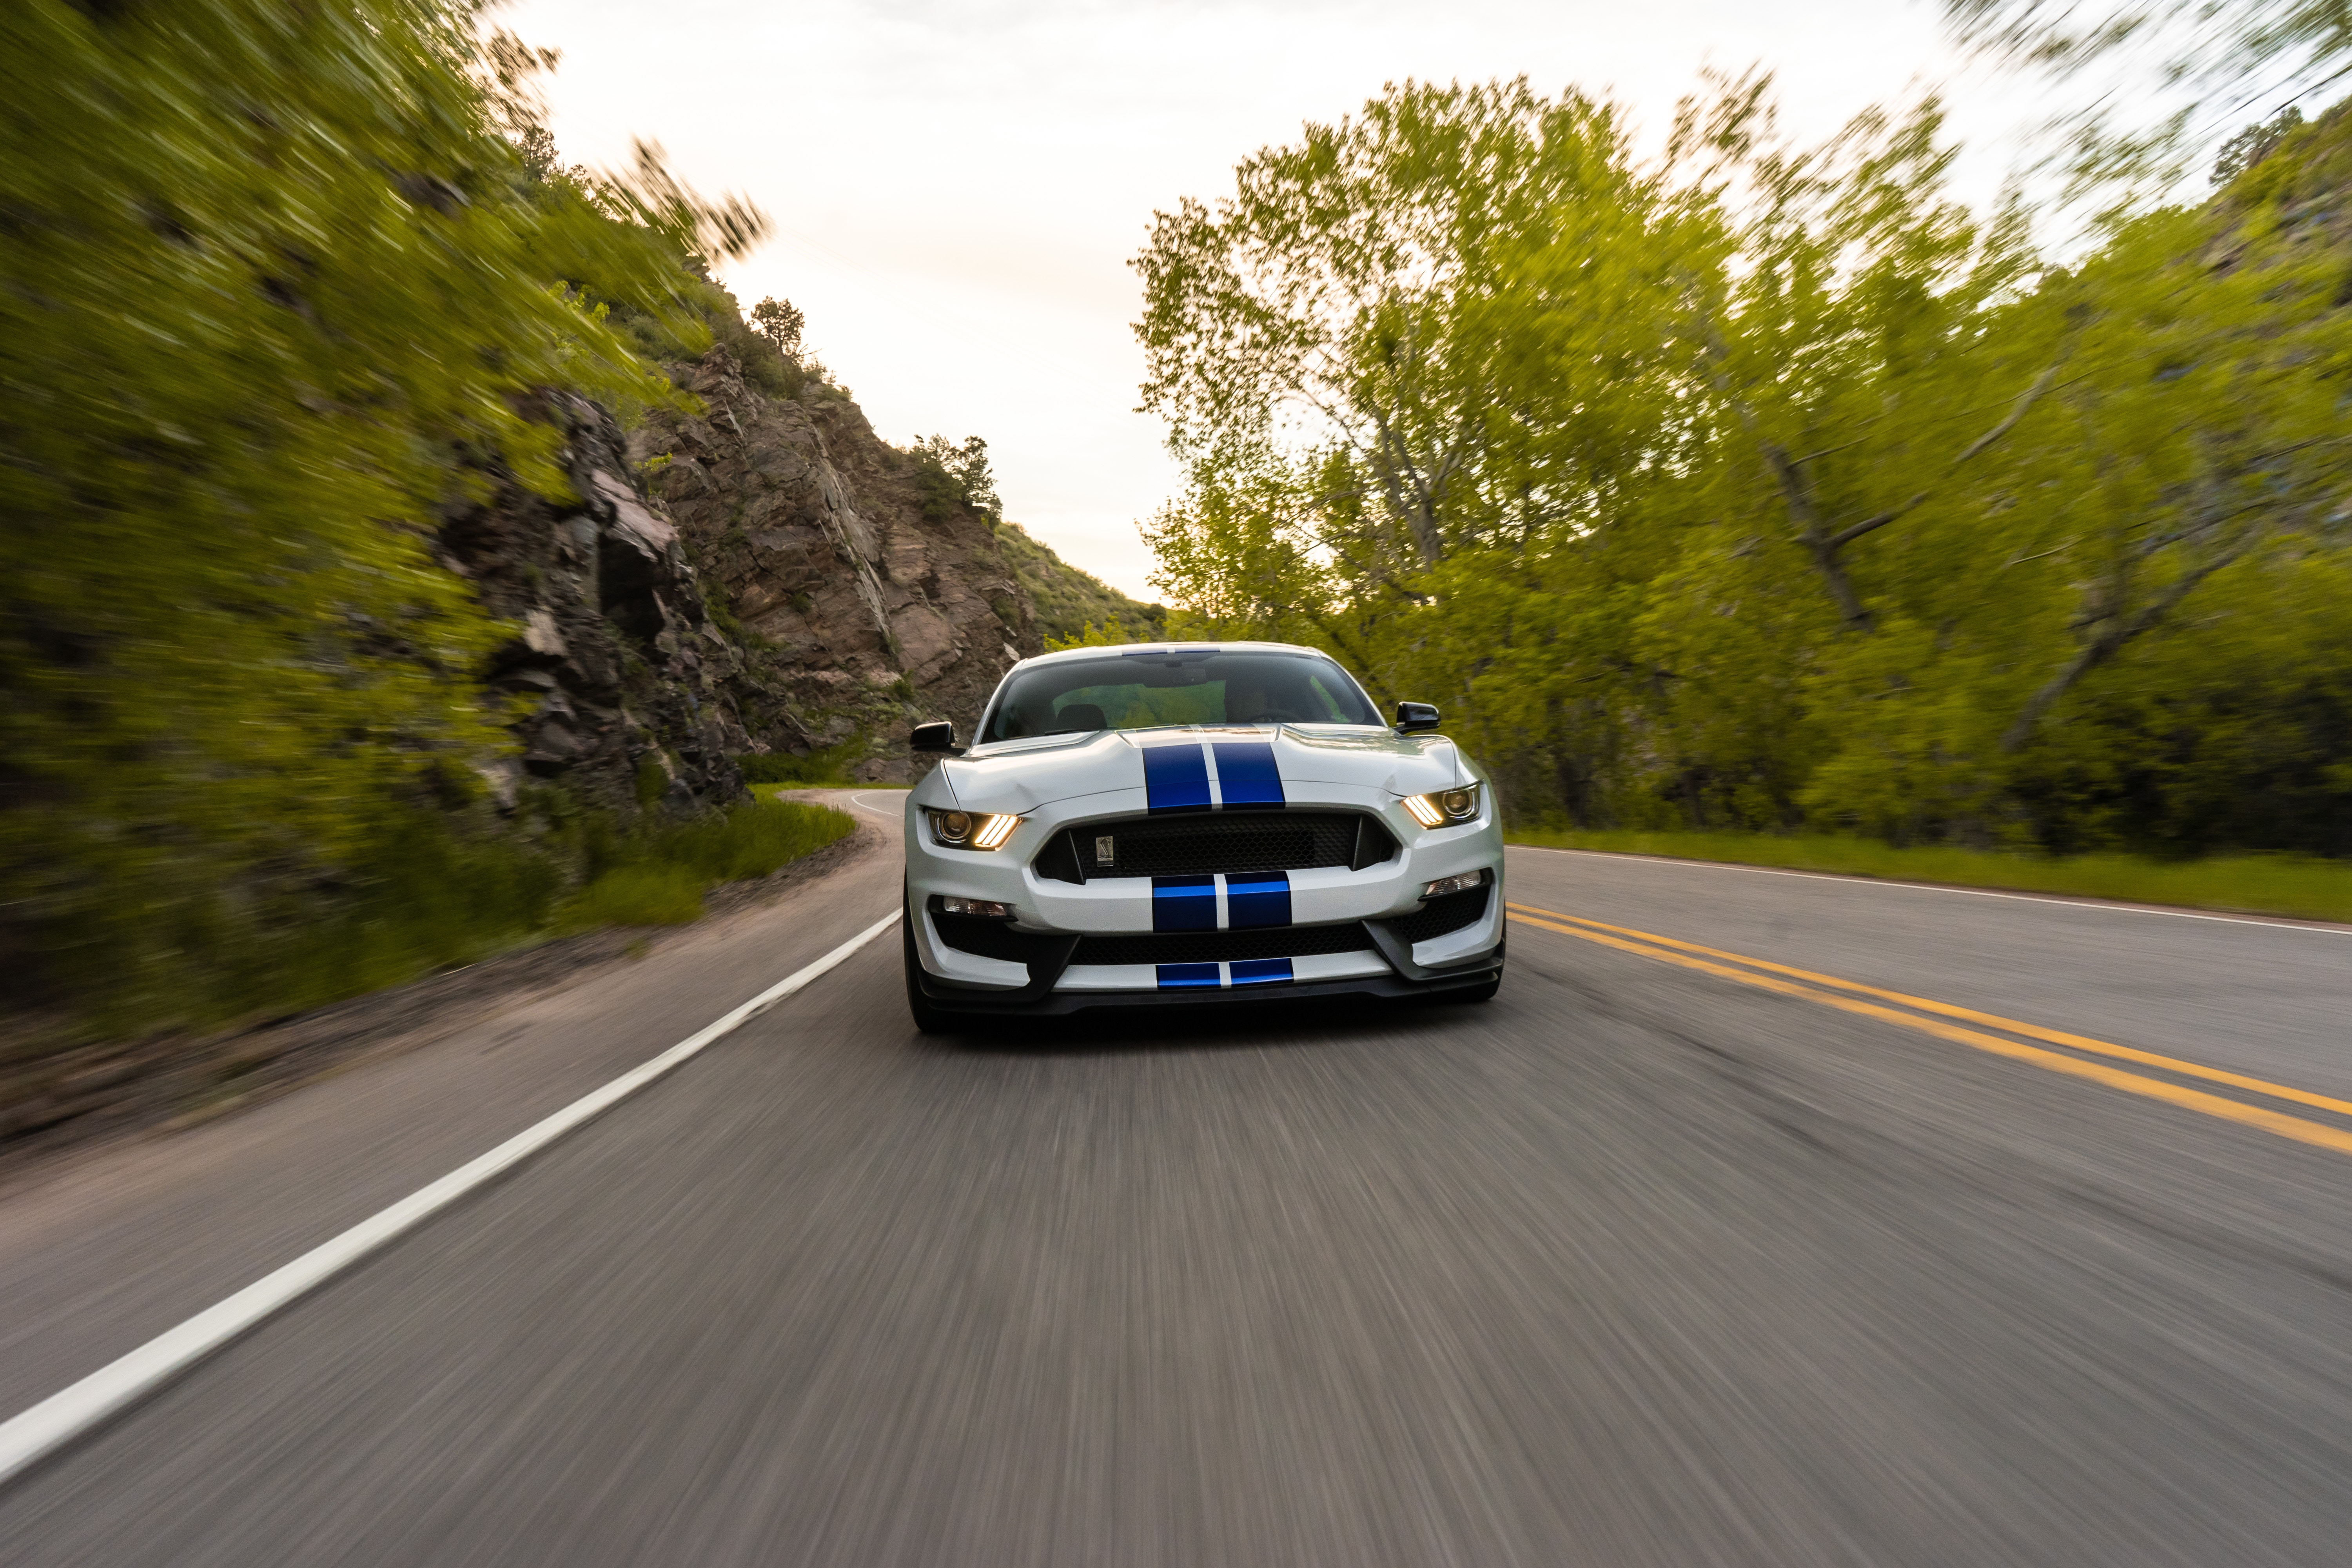 cars, sports car, ford mustang gt350, car, sports, ford, road, machine, speed 2160p